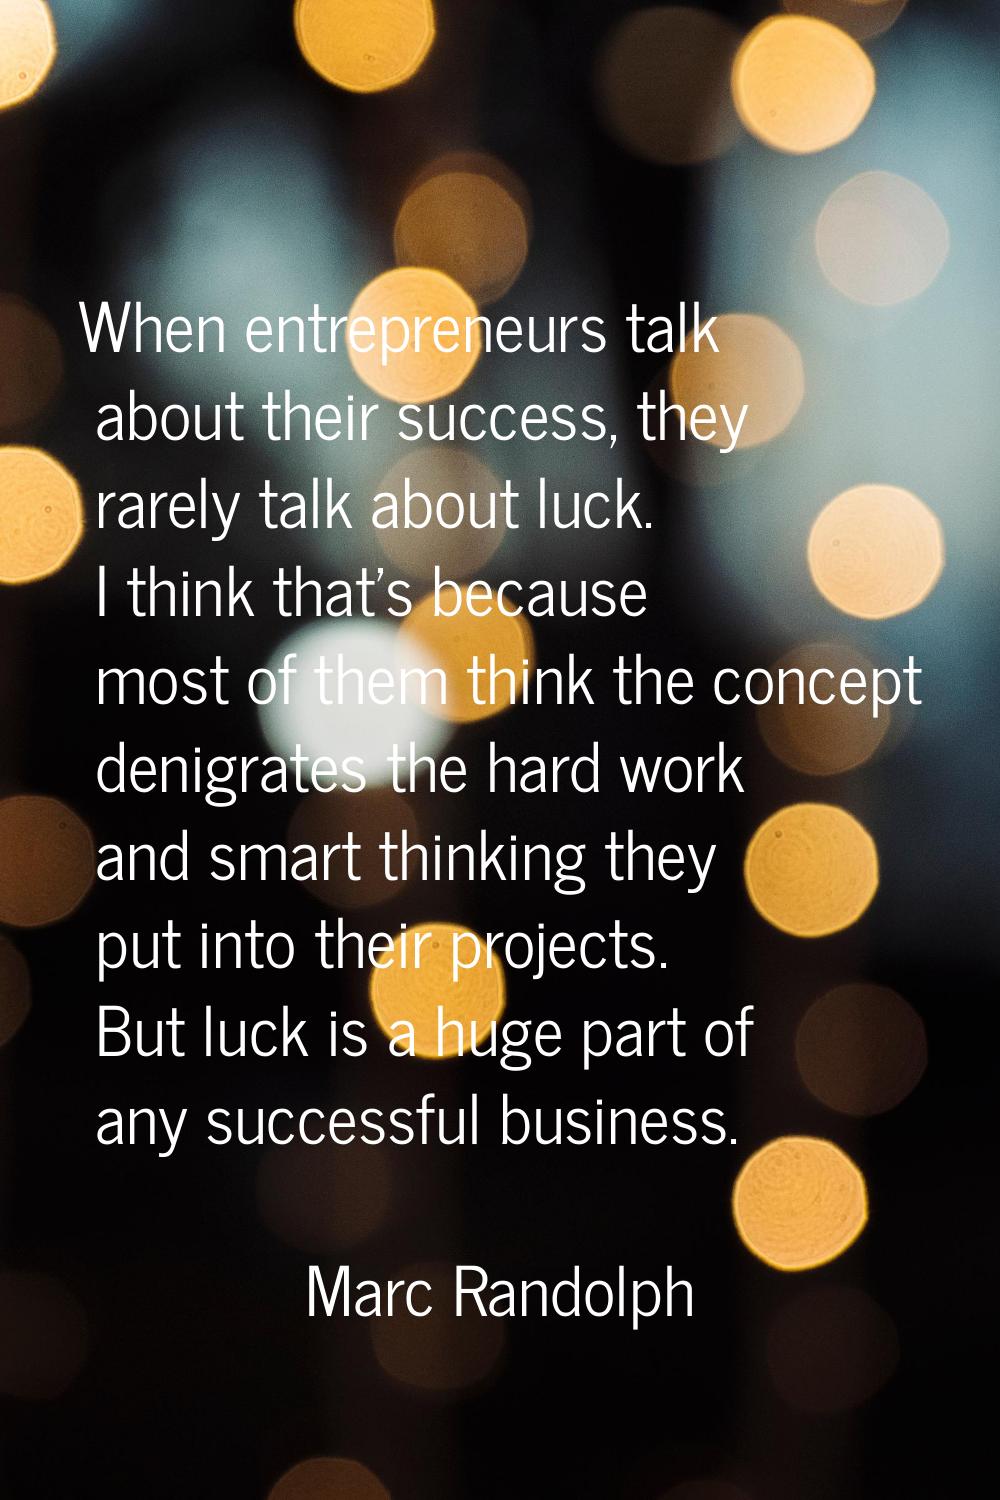 When entrepreneurs talk about their success, they rarely talk about luck. I think that's because mo